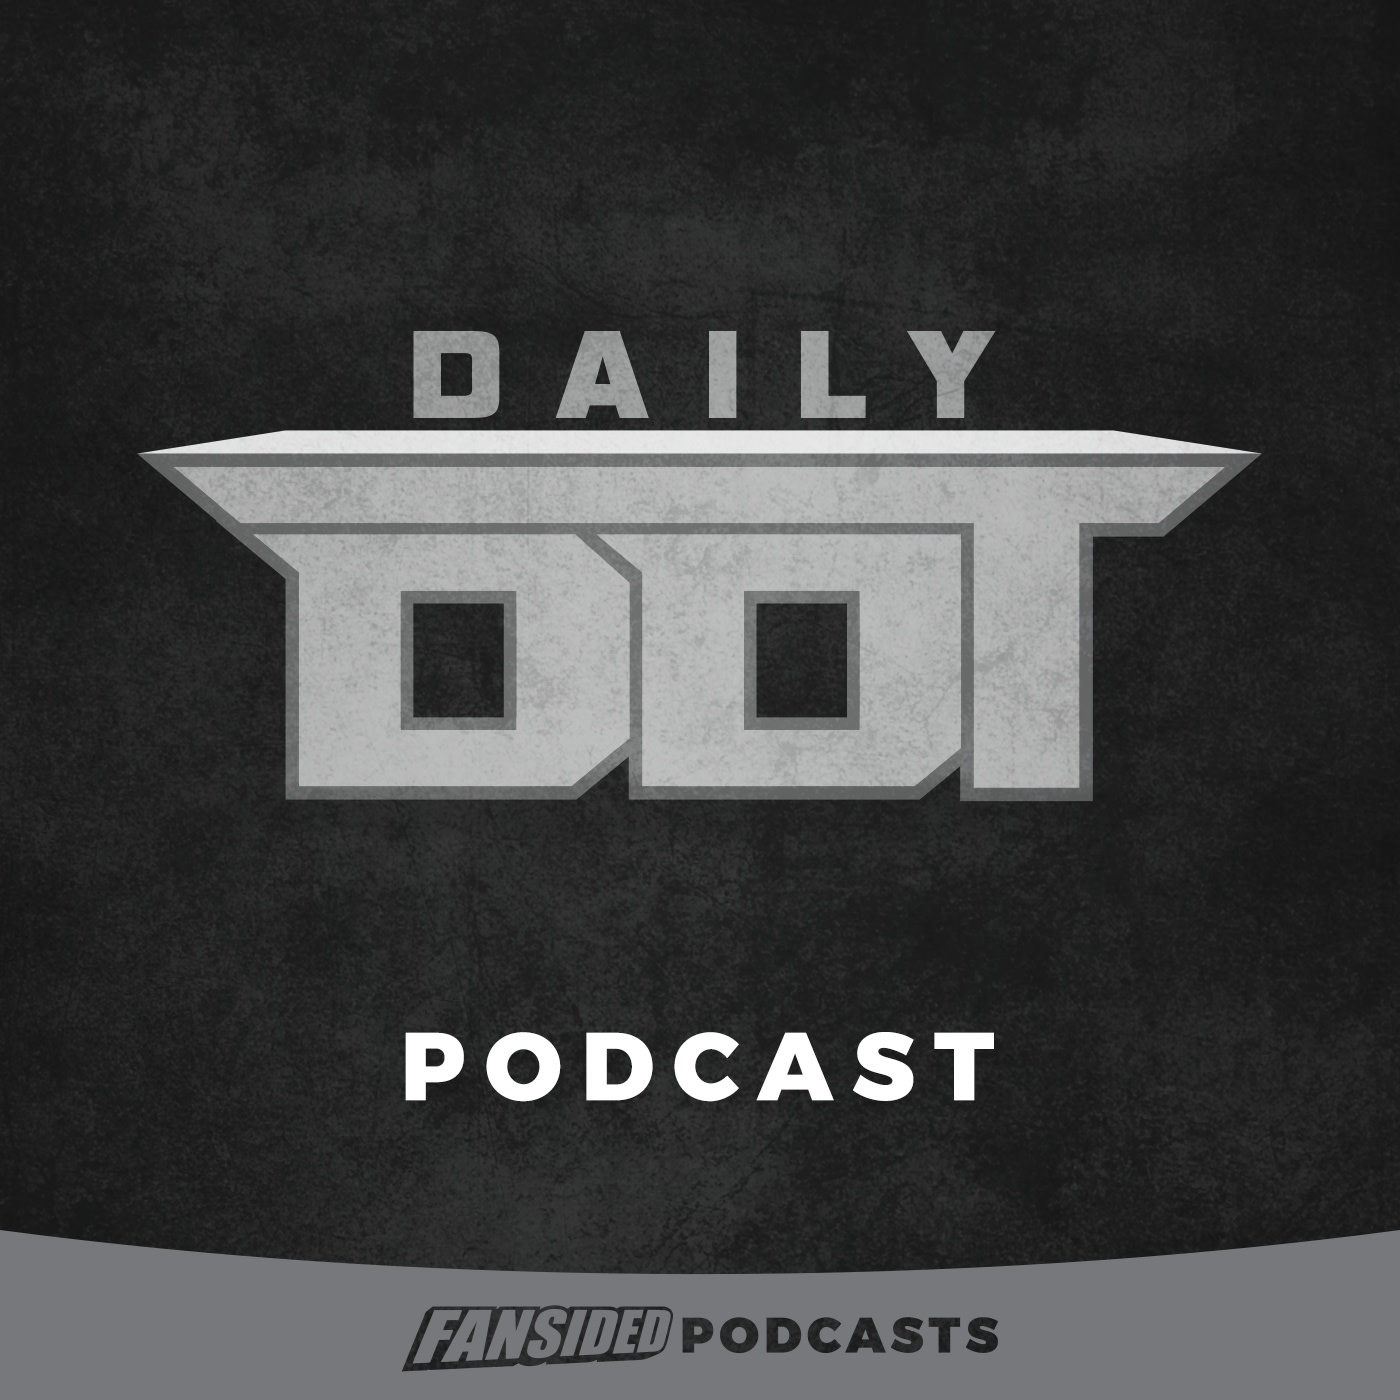 WWE Releases Braun Strowman and More: Daily DDT Podcast 6/2/21